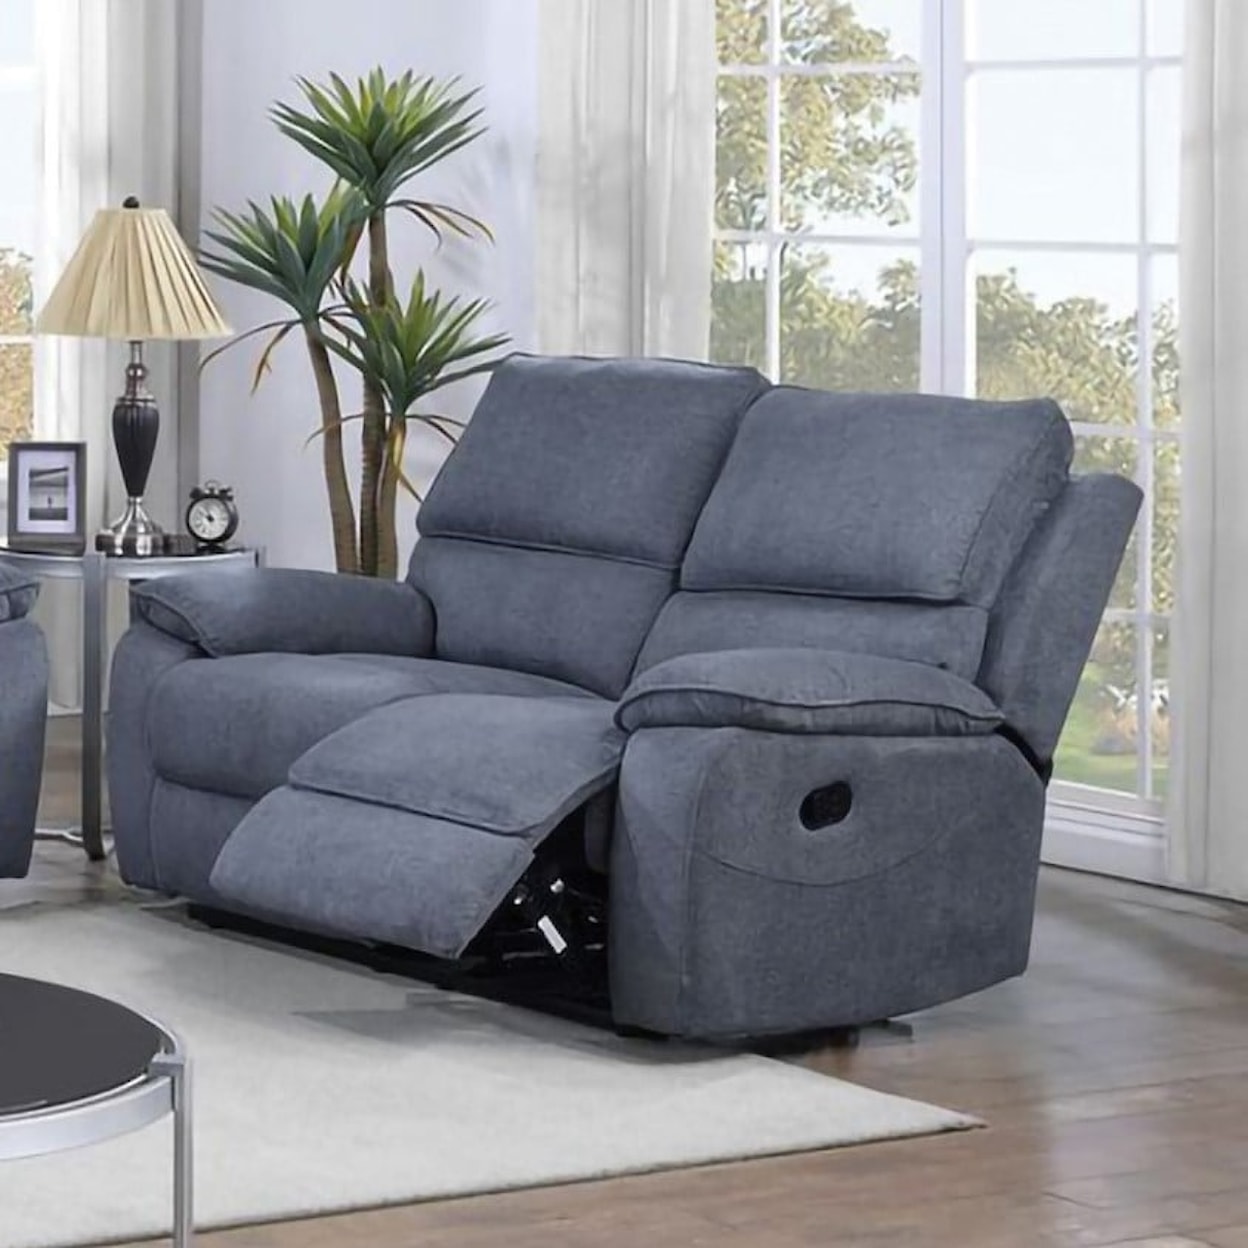 Lifestyle 81723 132381738 Reclining Loveseat with Console | Sam's ...